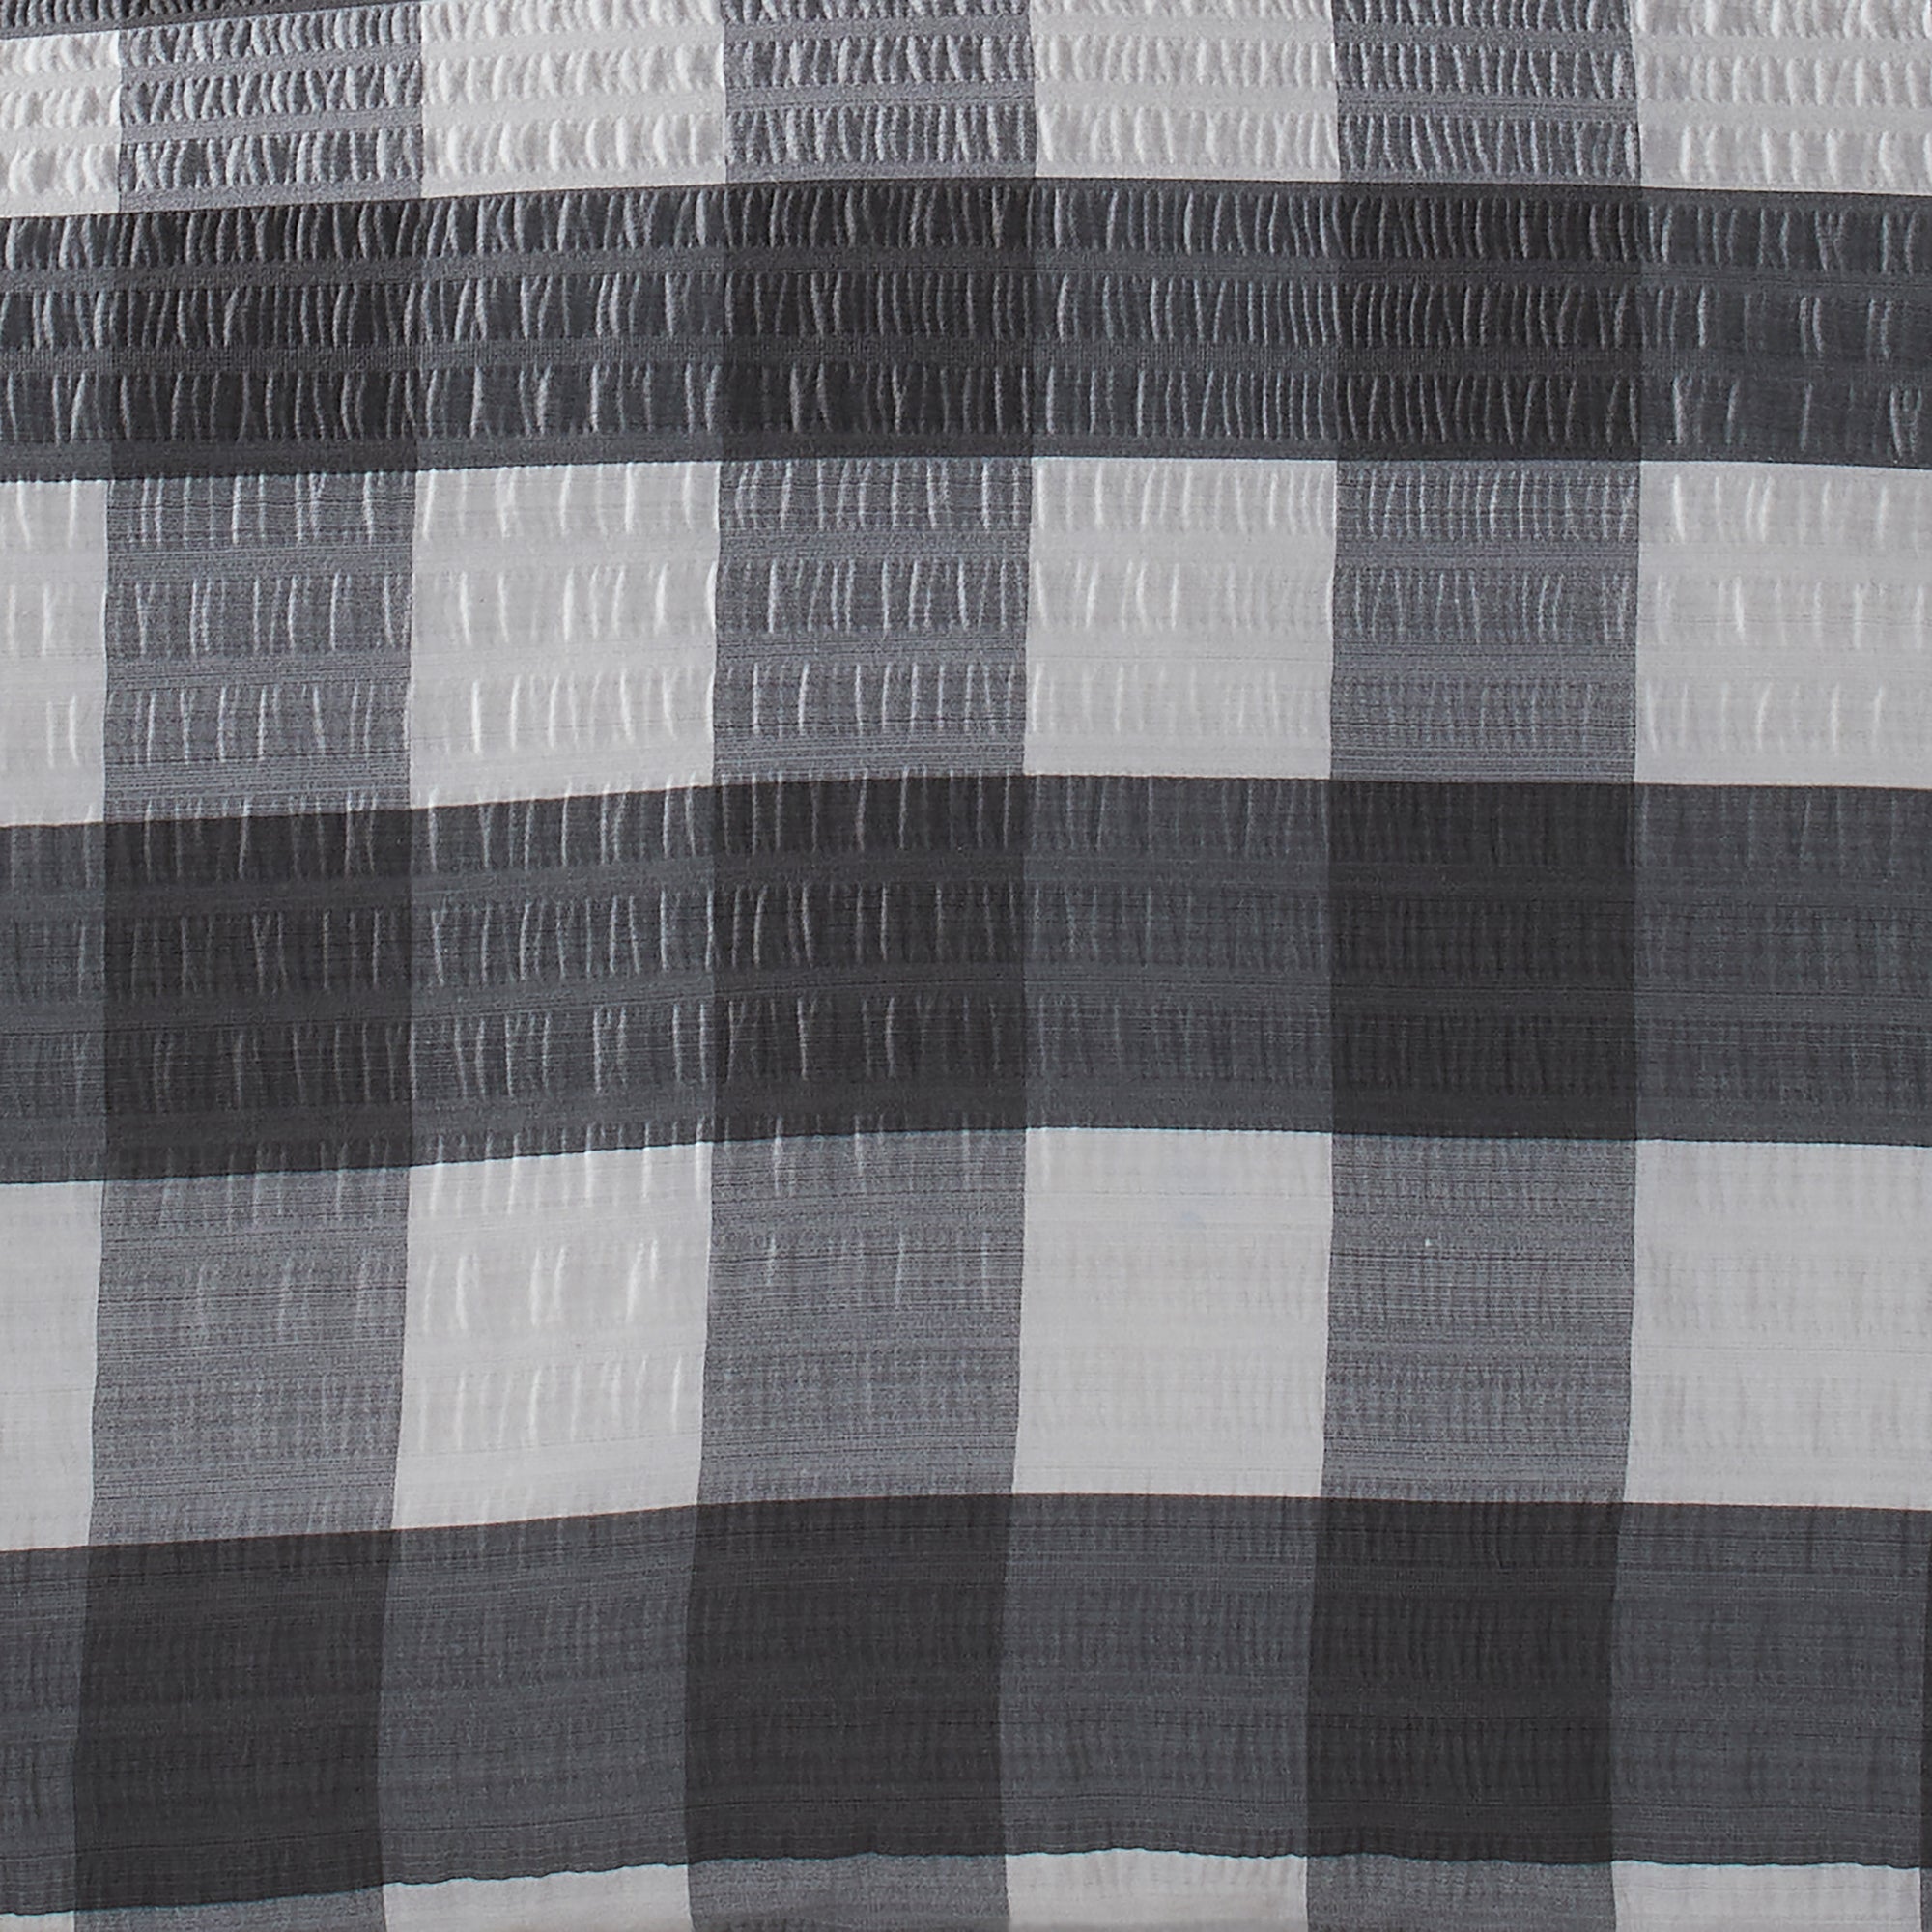 Duvet Cover Set Seersucker Gingham Check by Fusion Snug in Charcoal